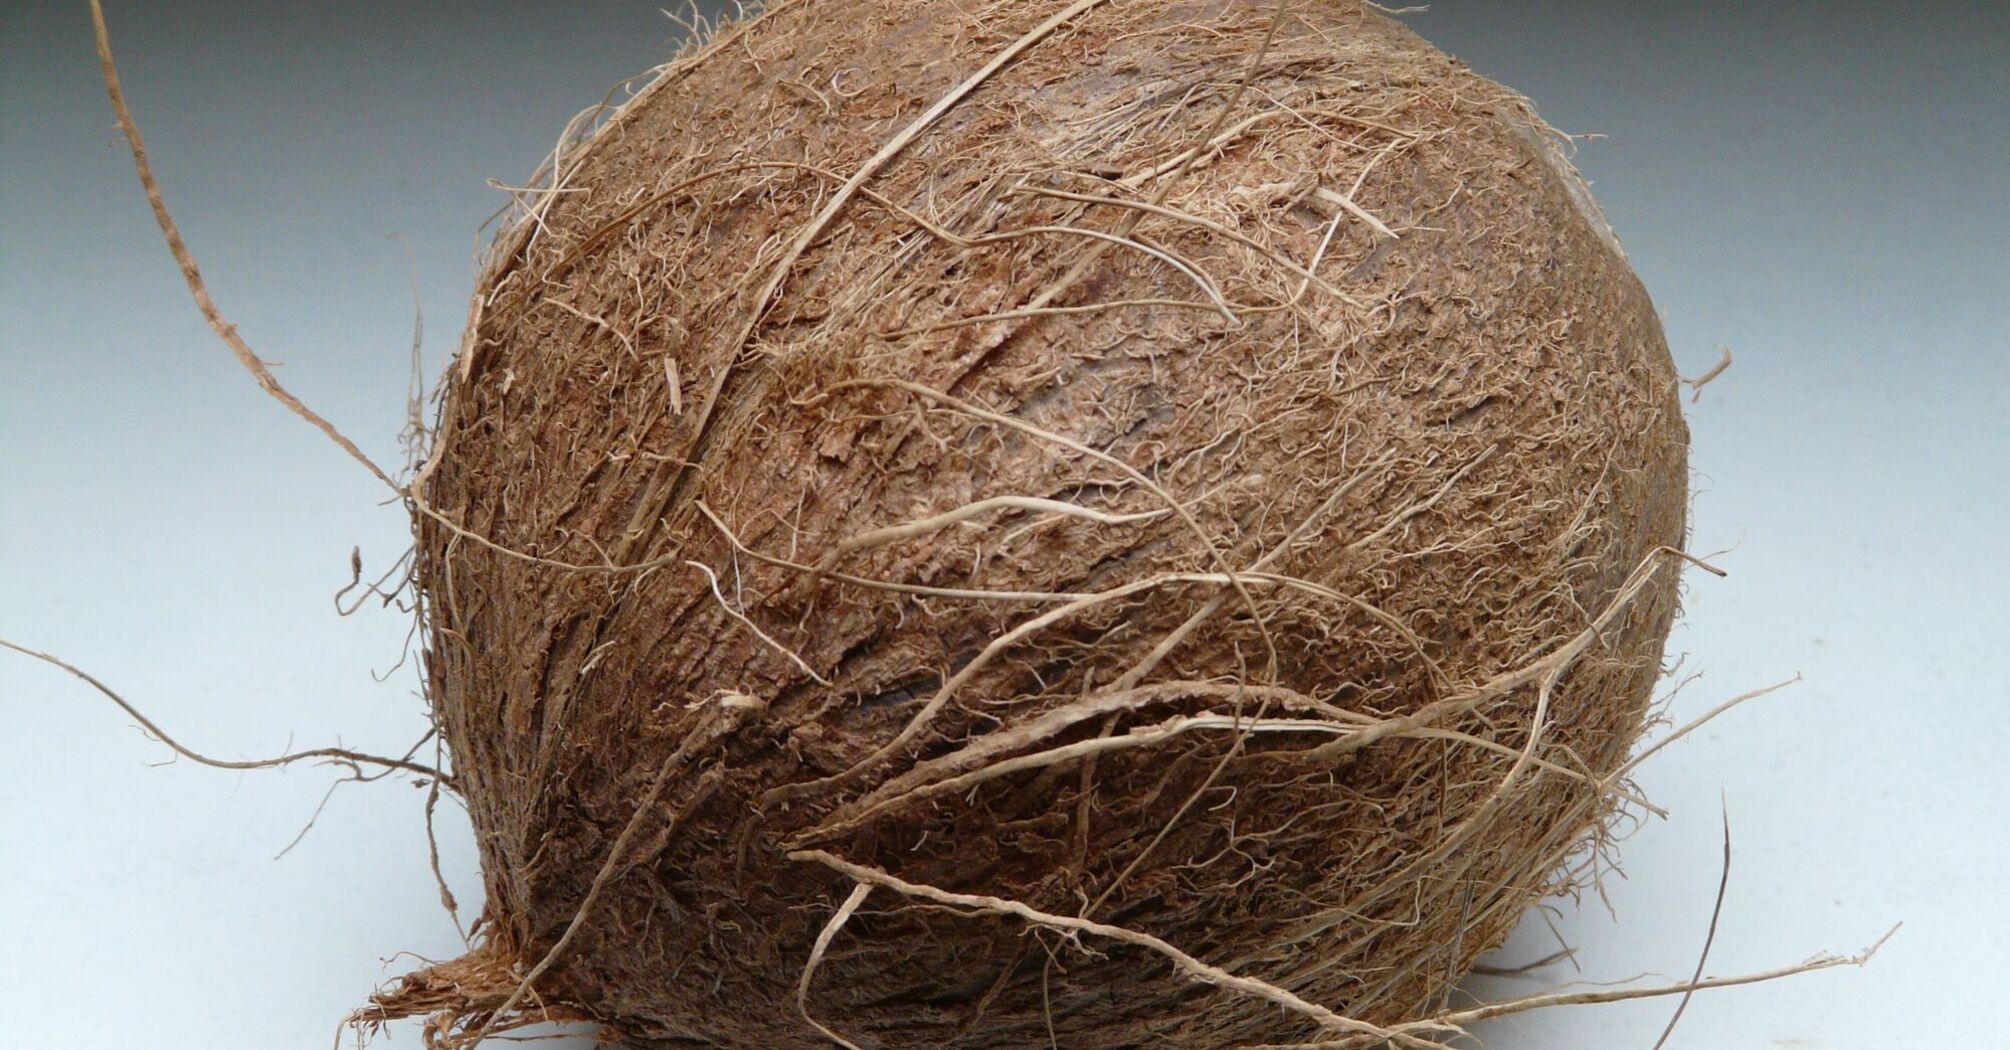 A whole, brown coconut with fibrous husk on a neutral background